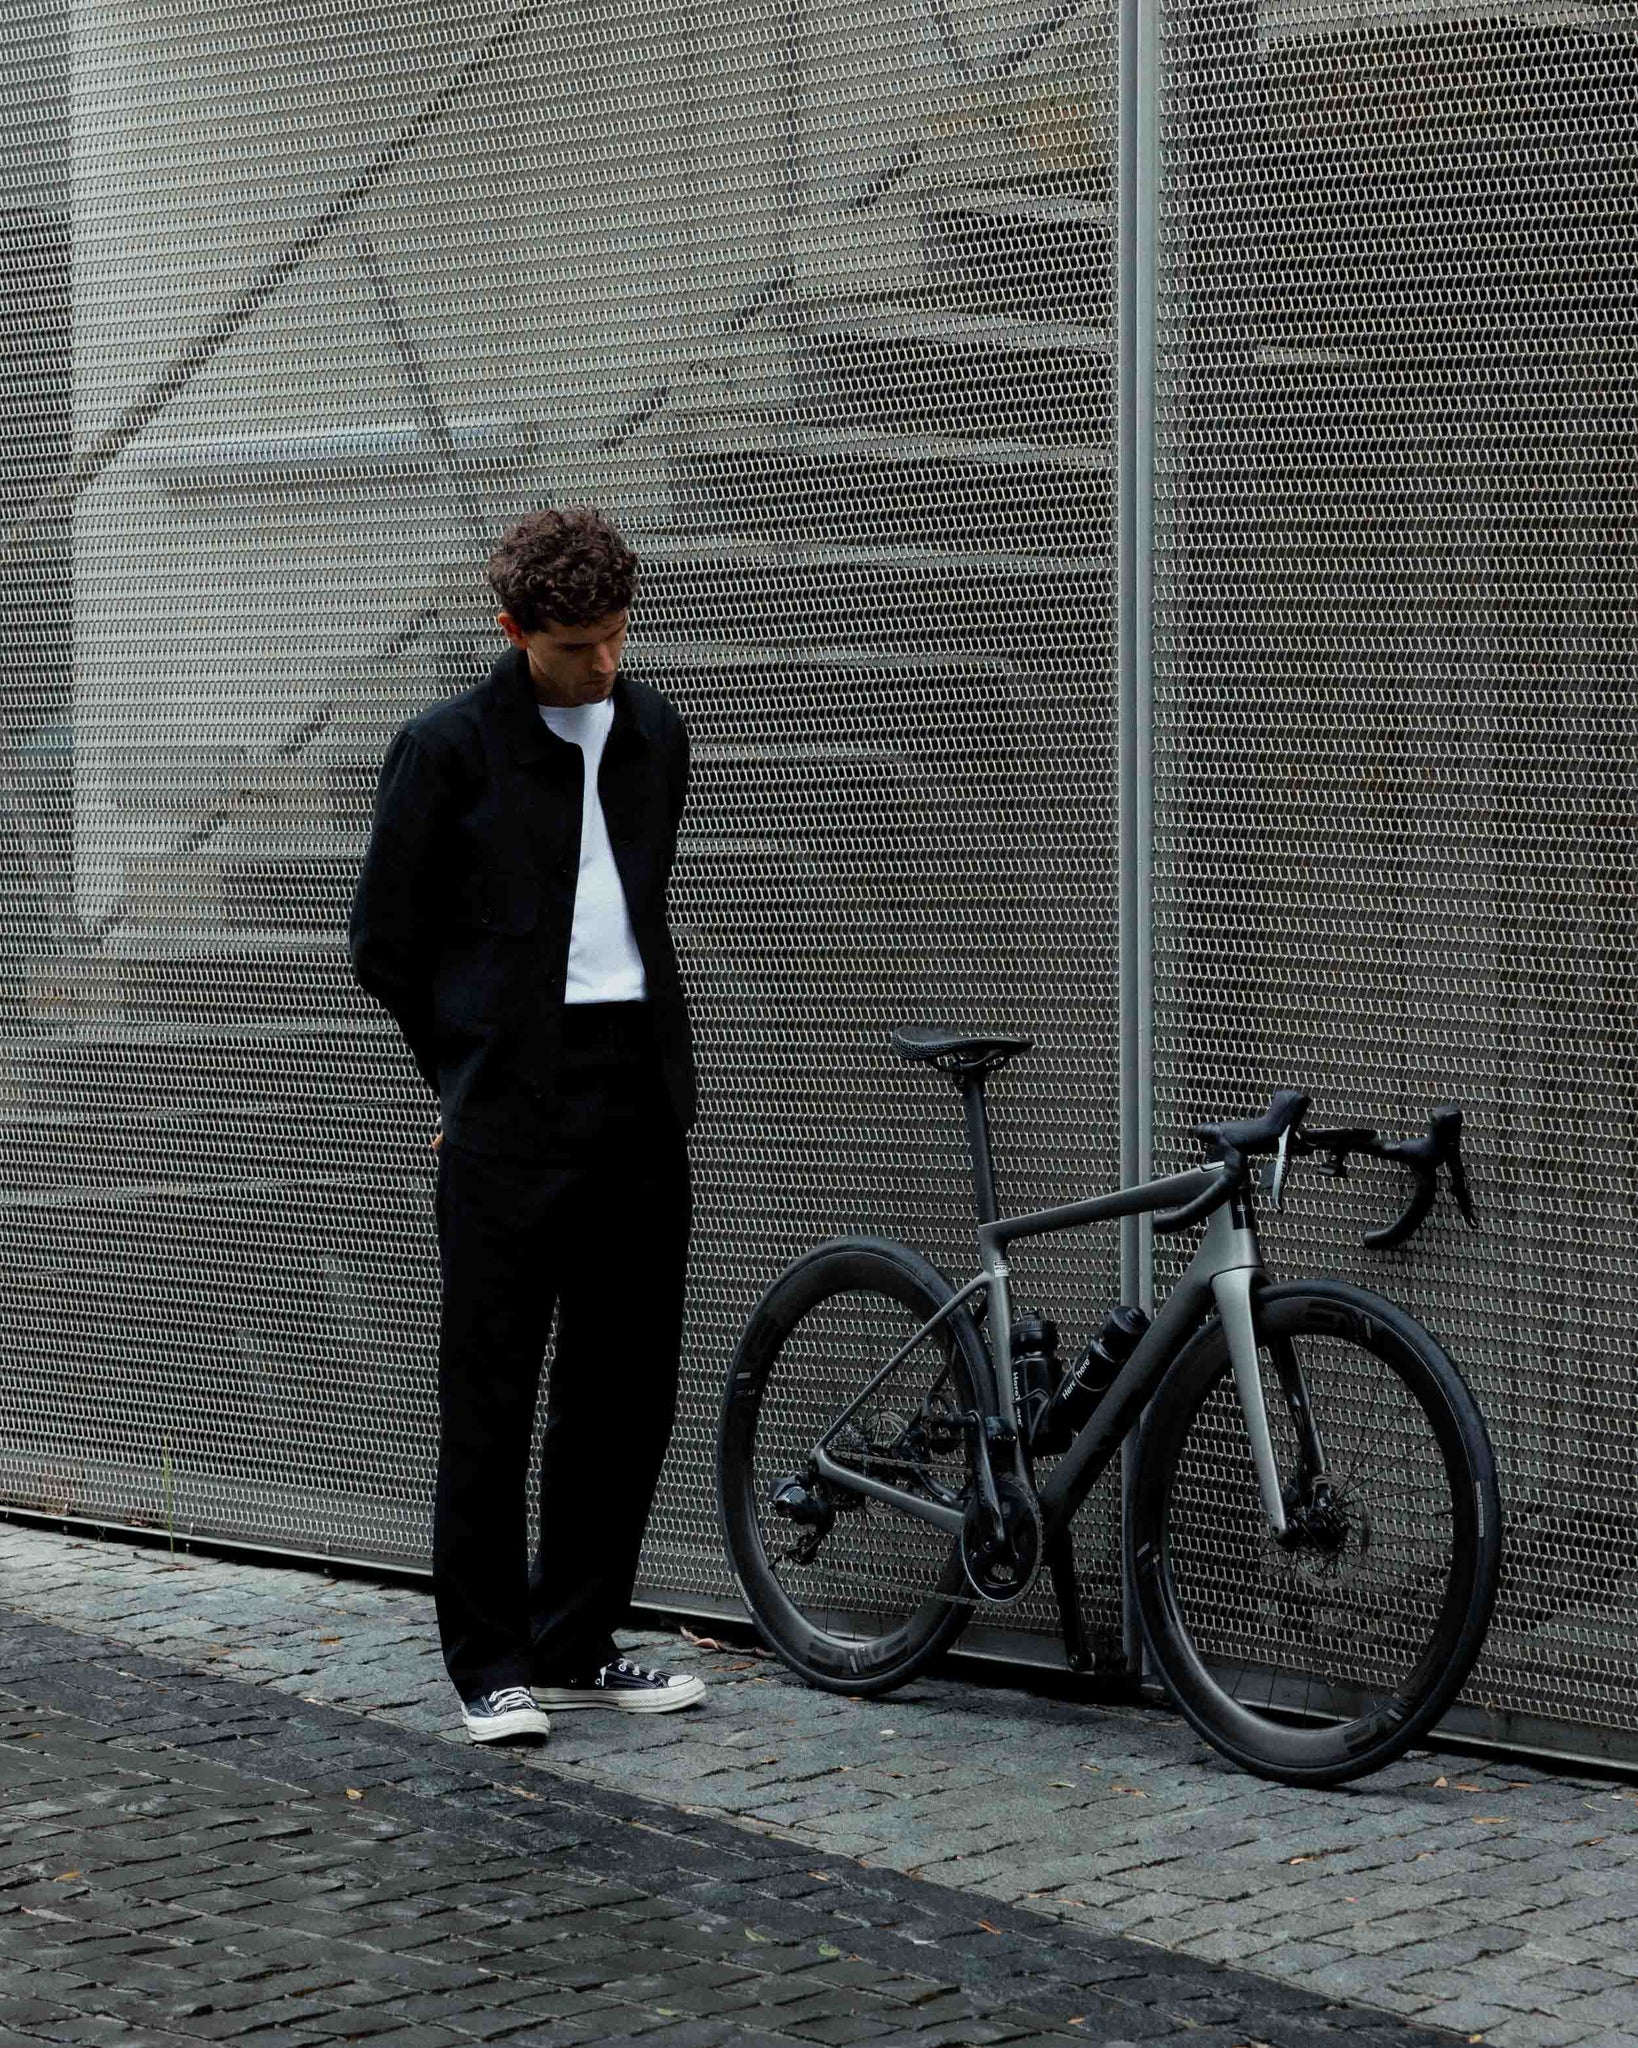 Johnny pictured with bike wearing a black jacket, white t-shirt and black pants.